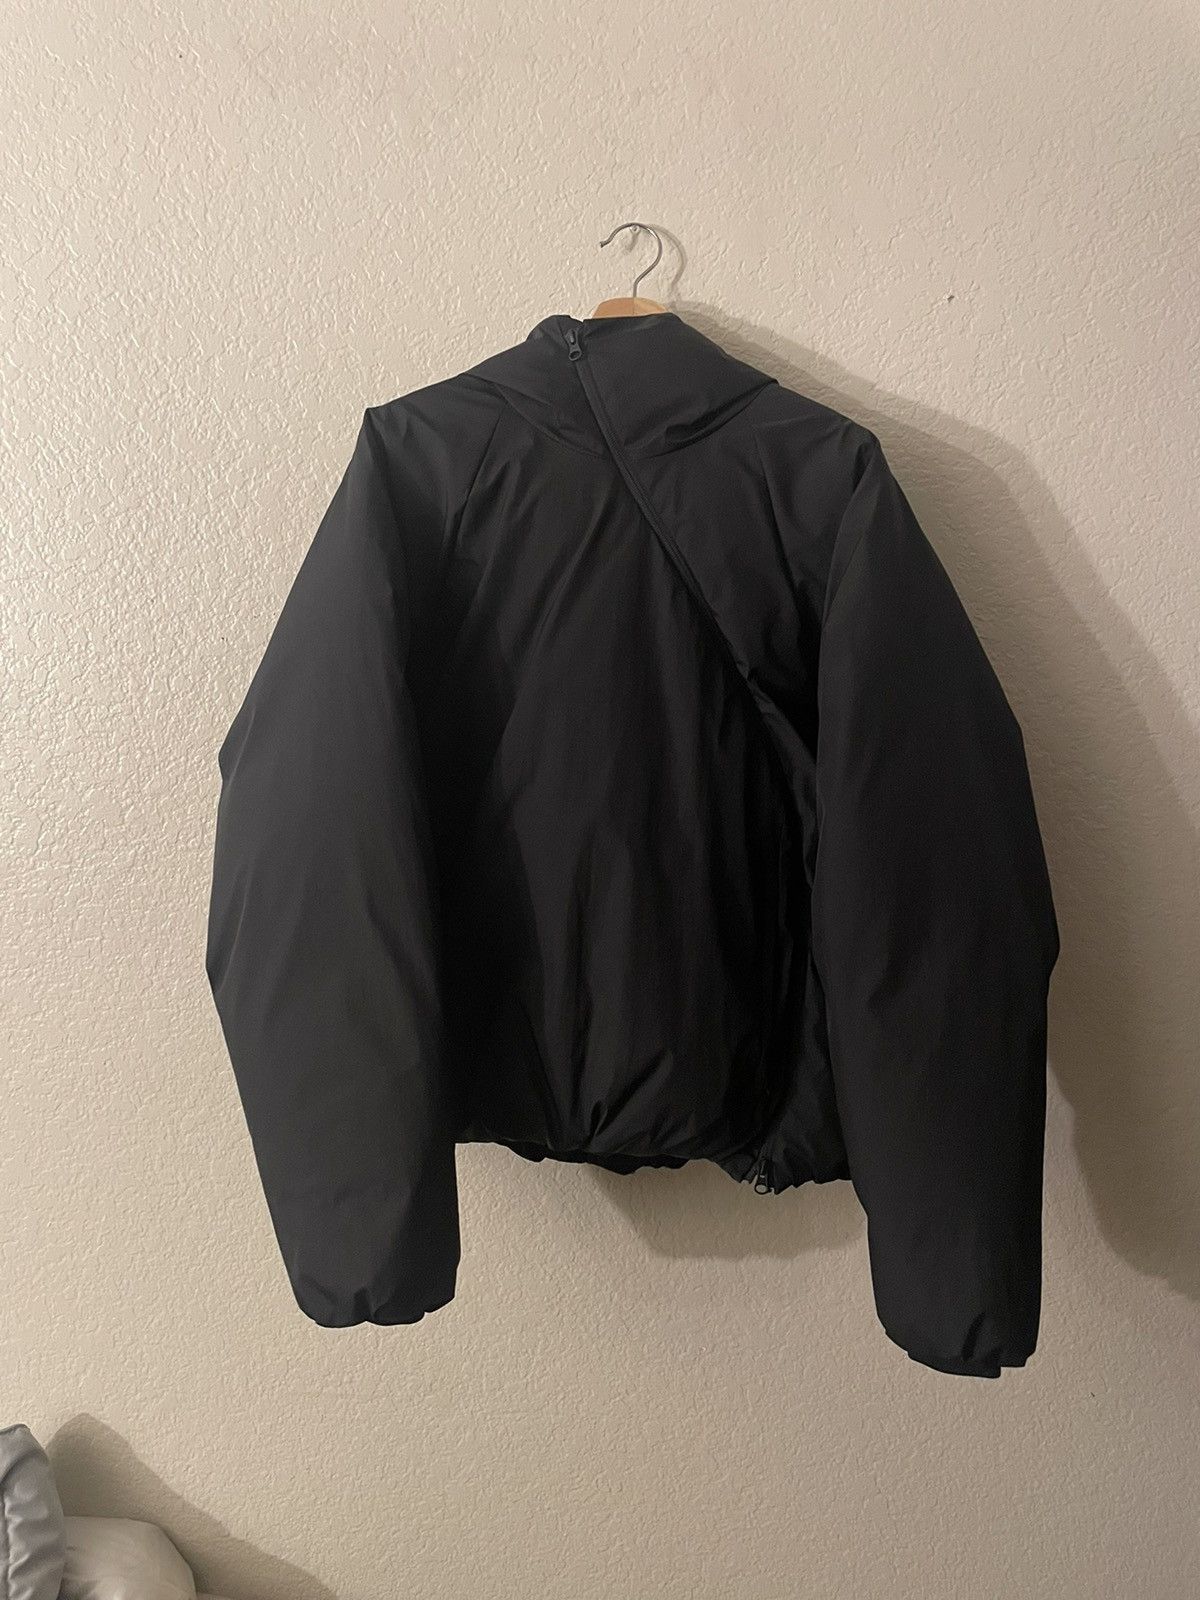 Pre-owned Post Archive Faction Paf Post Archive Faction Down Center Jacket 5.0 In Black